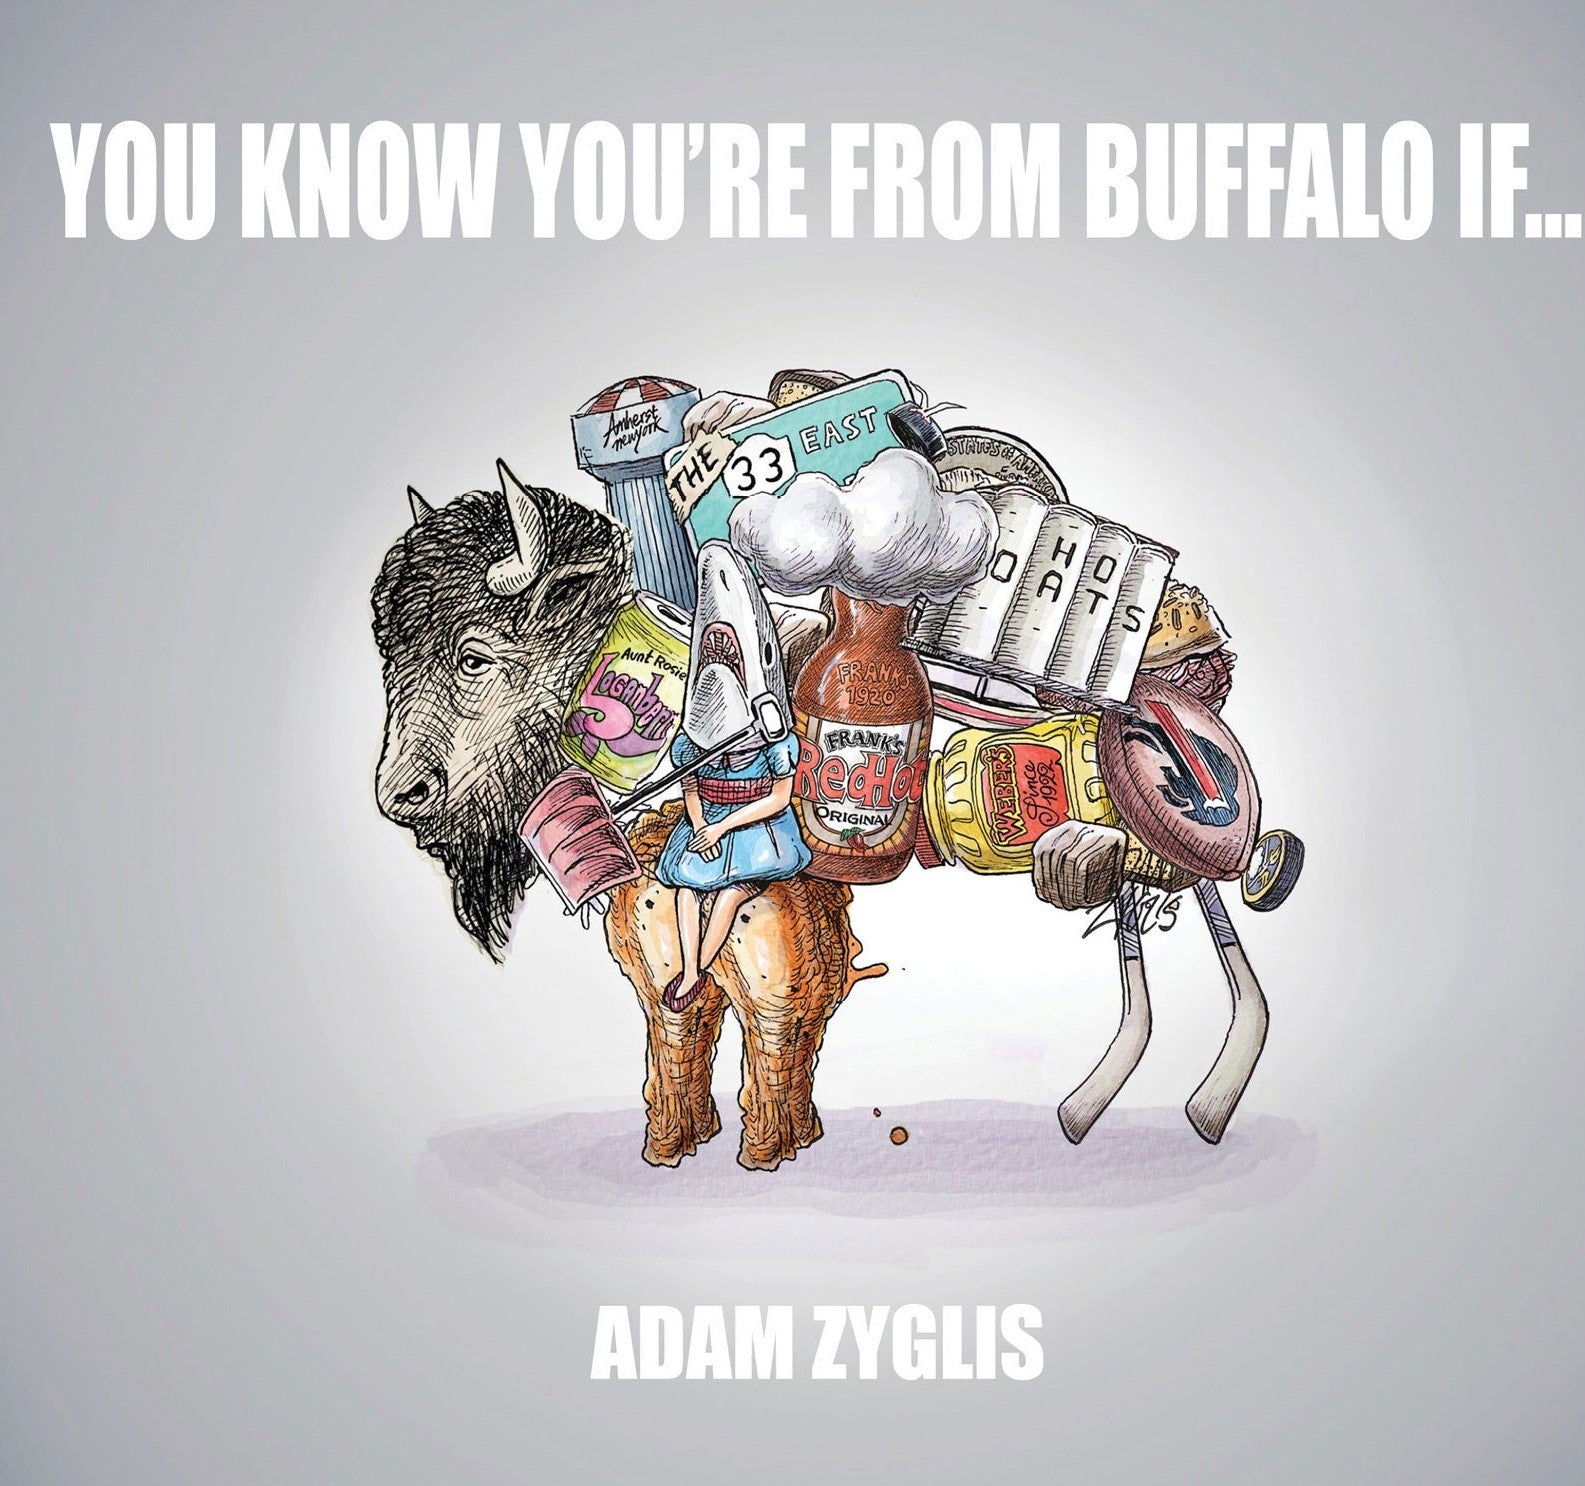 We recently got in a bunch of - Dave & Adam's Buffalo